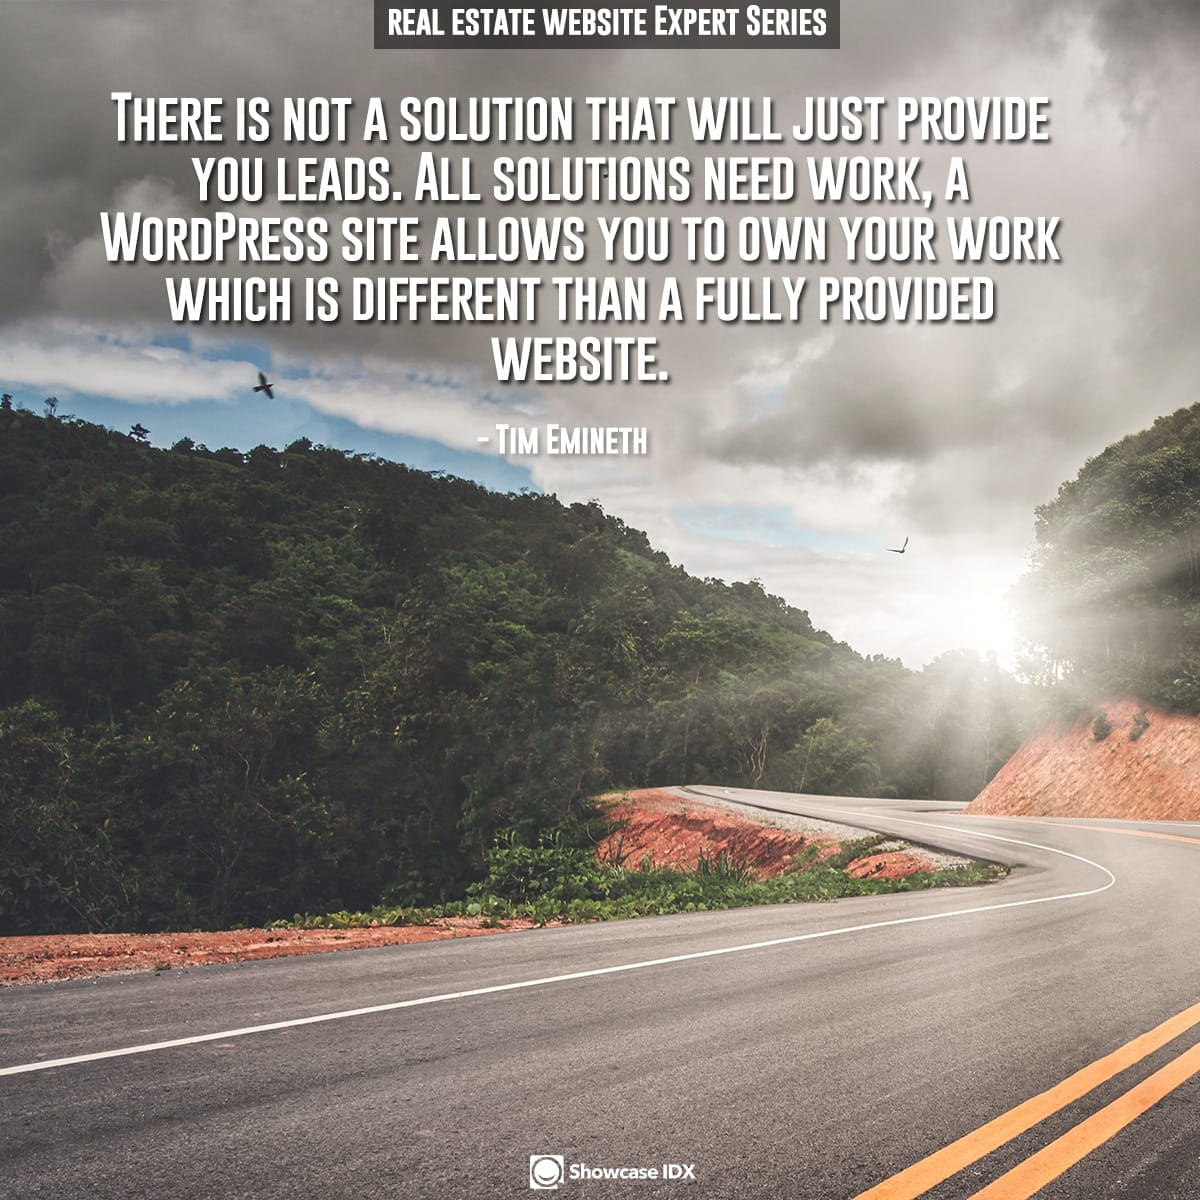 There is not a solution that will just provide you leads. All solutions need work, a WordPress site allows you to own your work which is different than a fully provided website.